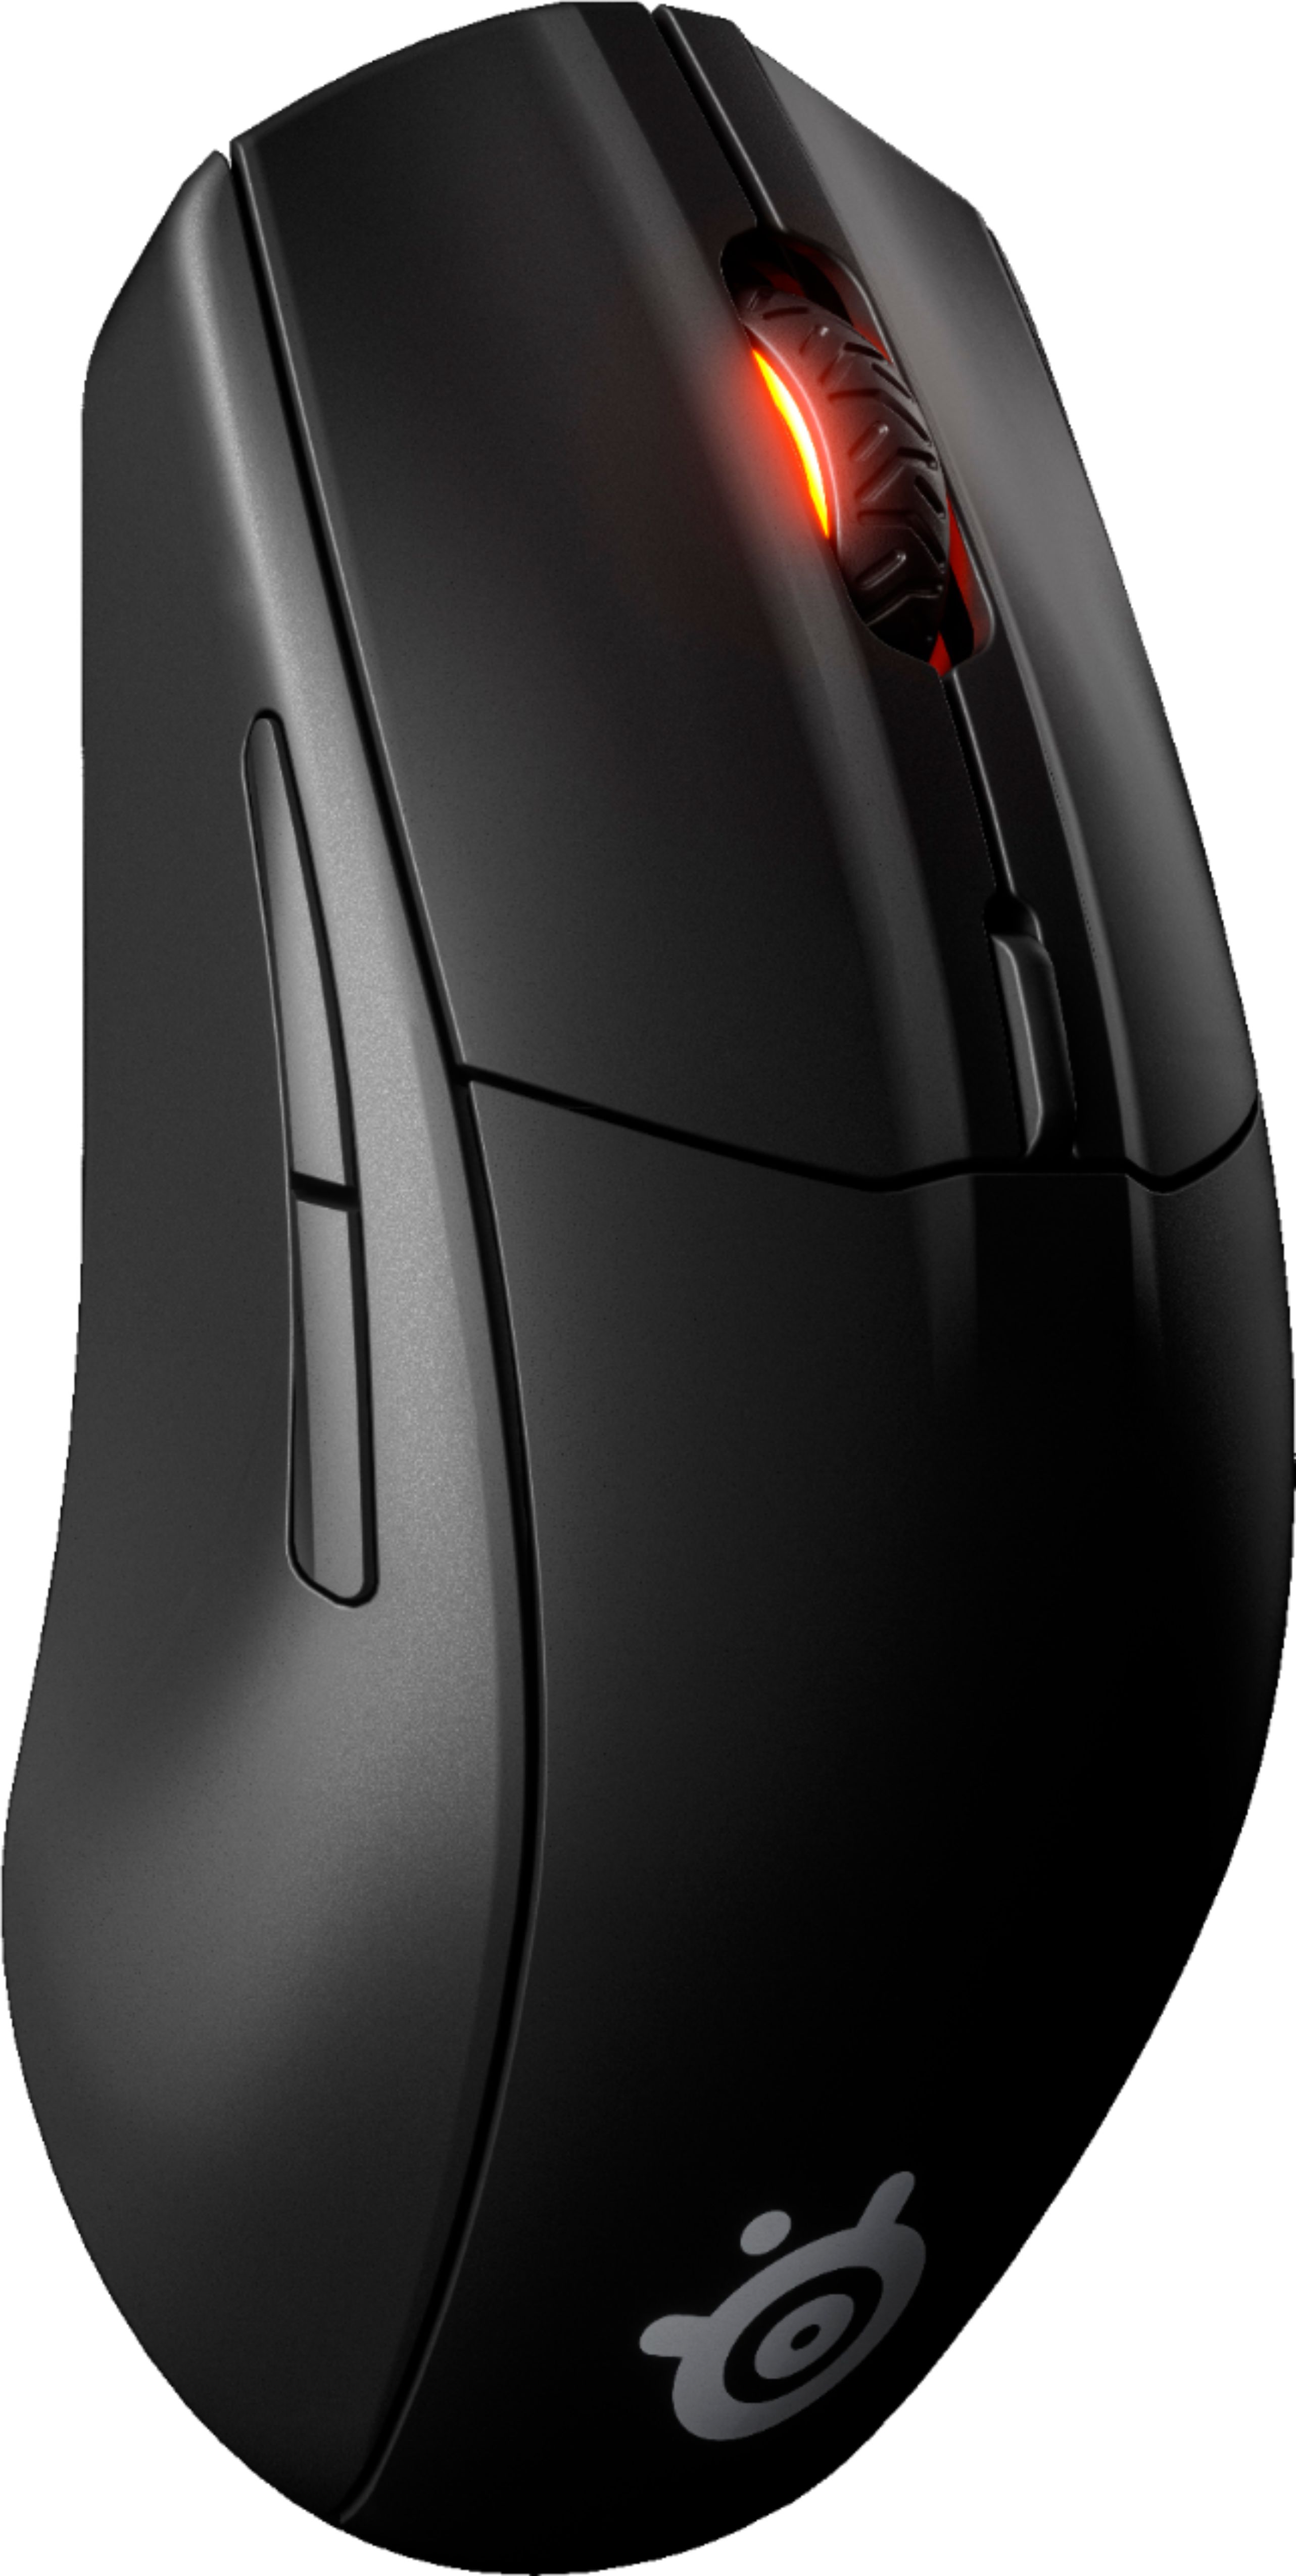 Angle View: SteelSeries - Rival 3 Lightweight Wireless Optical Gaming Mouse with Brilliant Prism RGB Lighting - Black